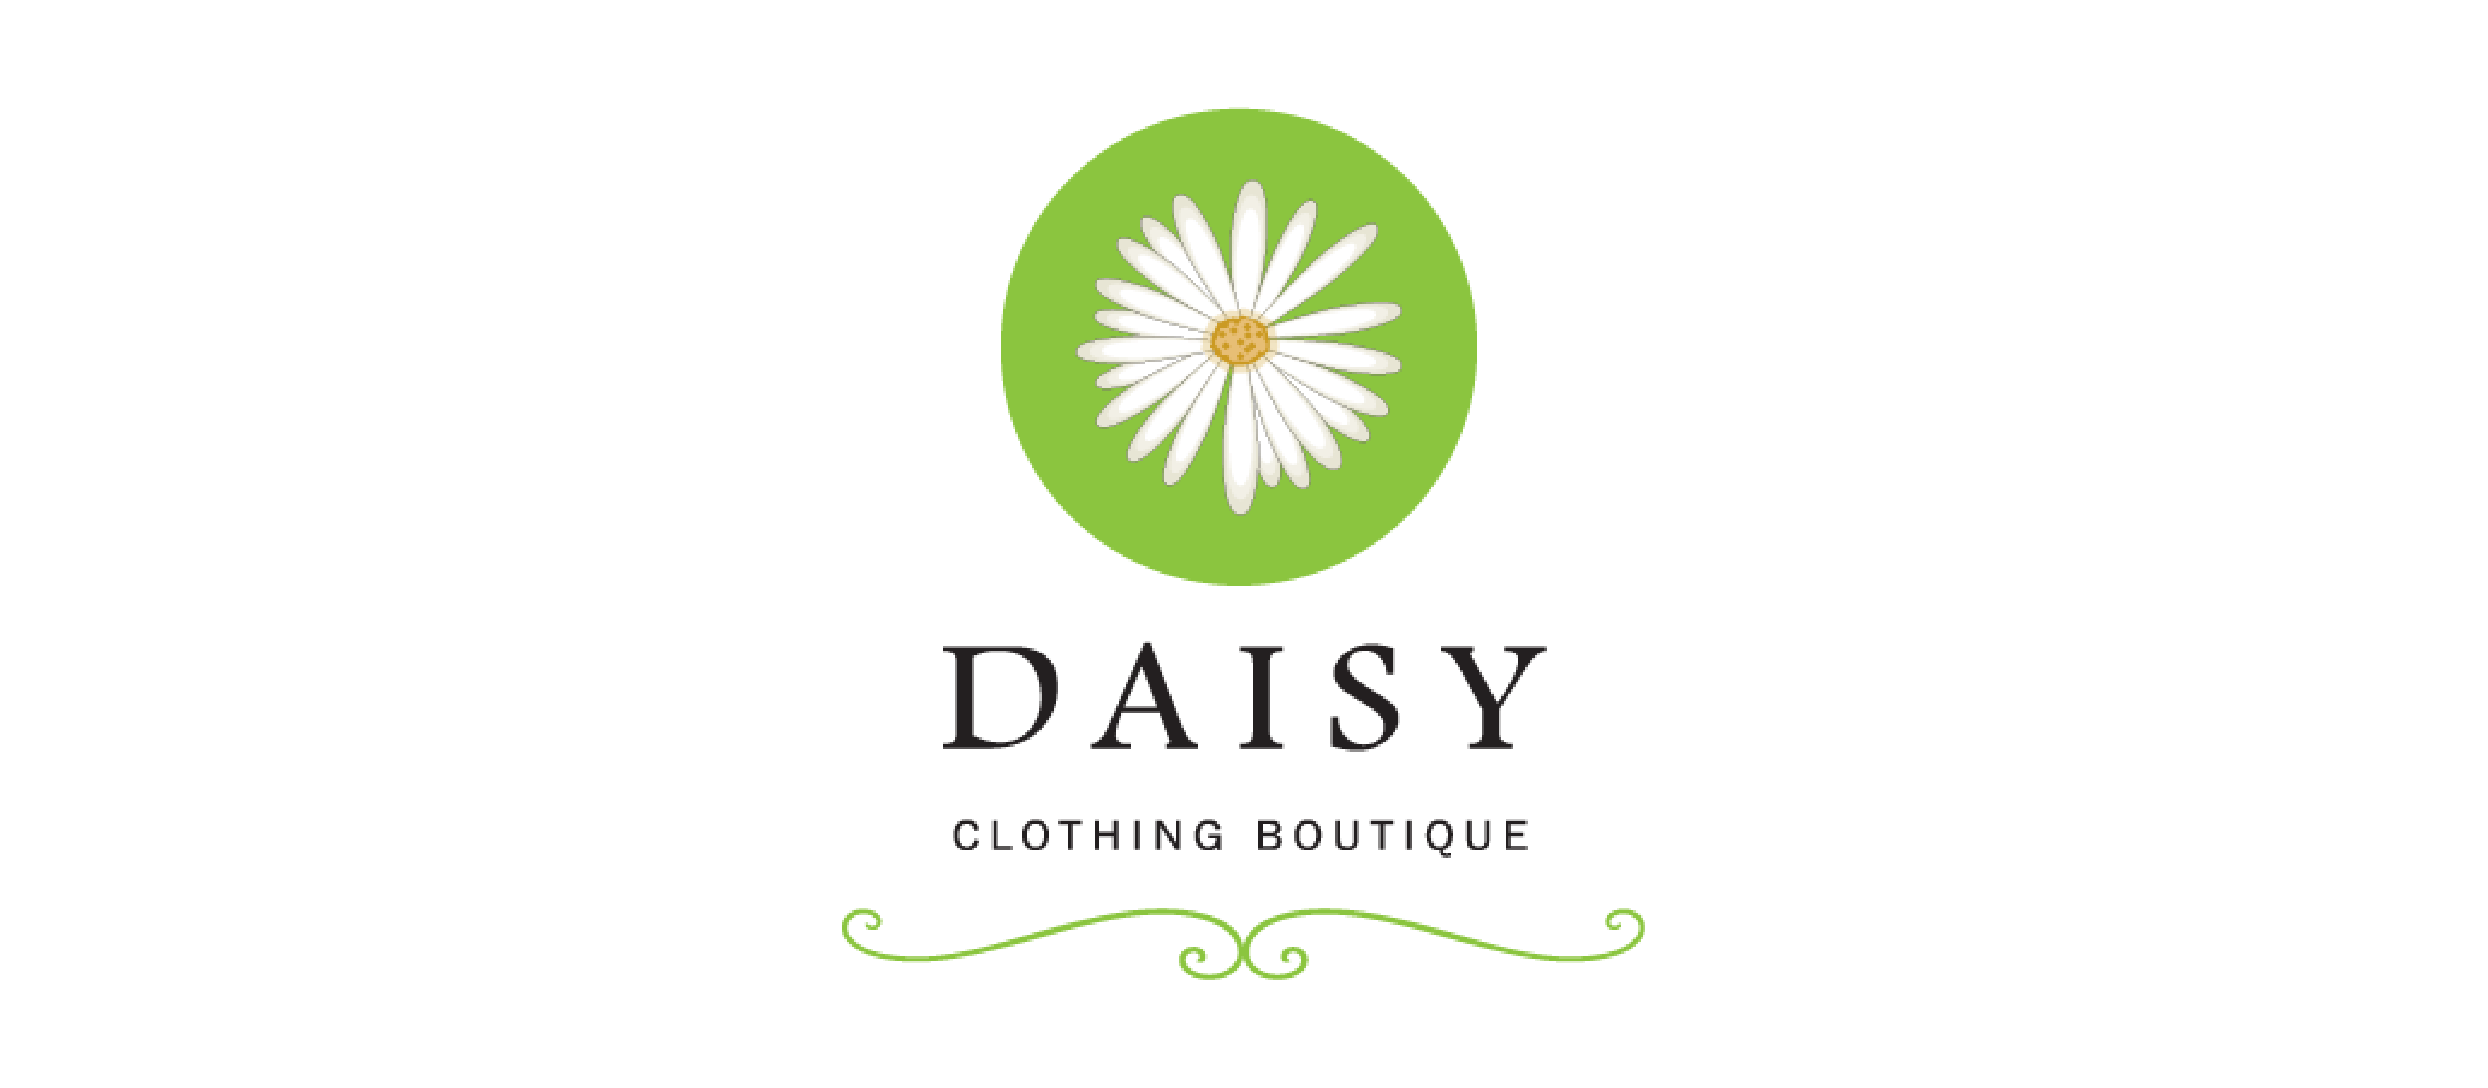 Daisy Clothing Boutique